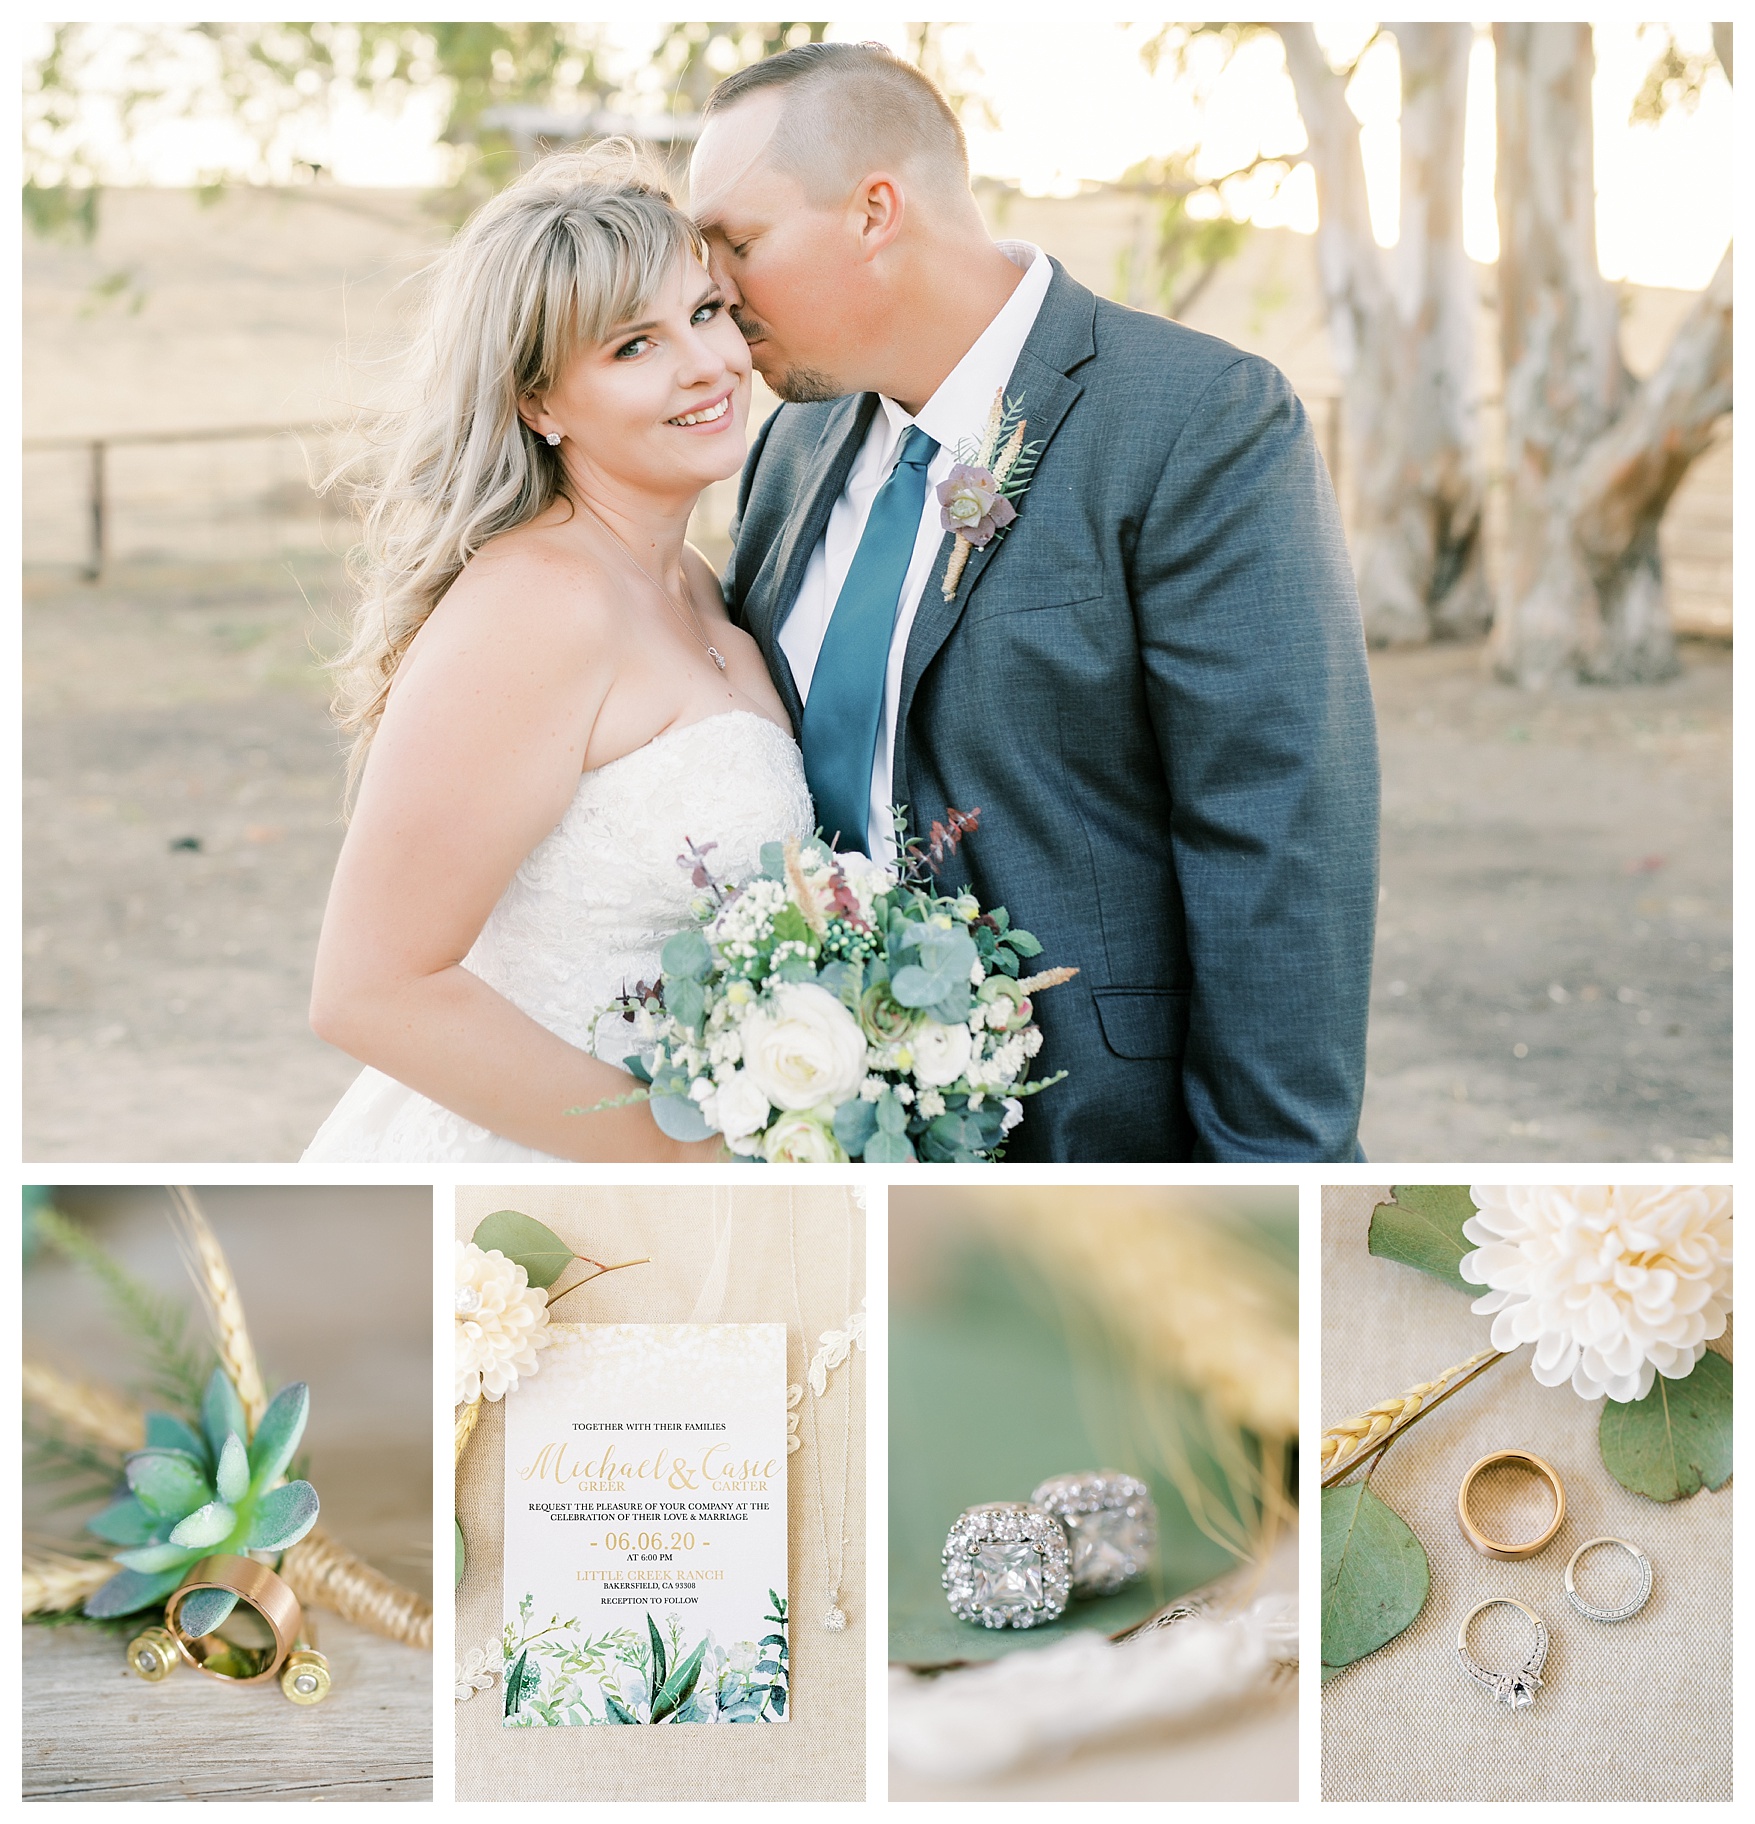 Wedding pictures in Bakersfield, Ca. Wedding rings, earrings, wedding invitation. Greens, creams, and succulents. 